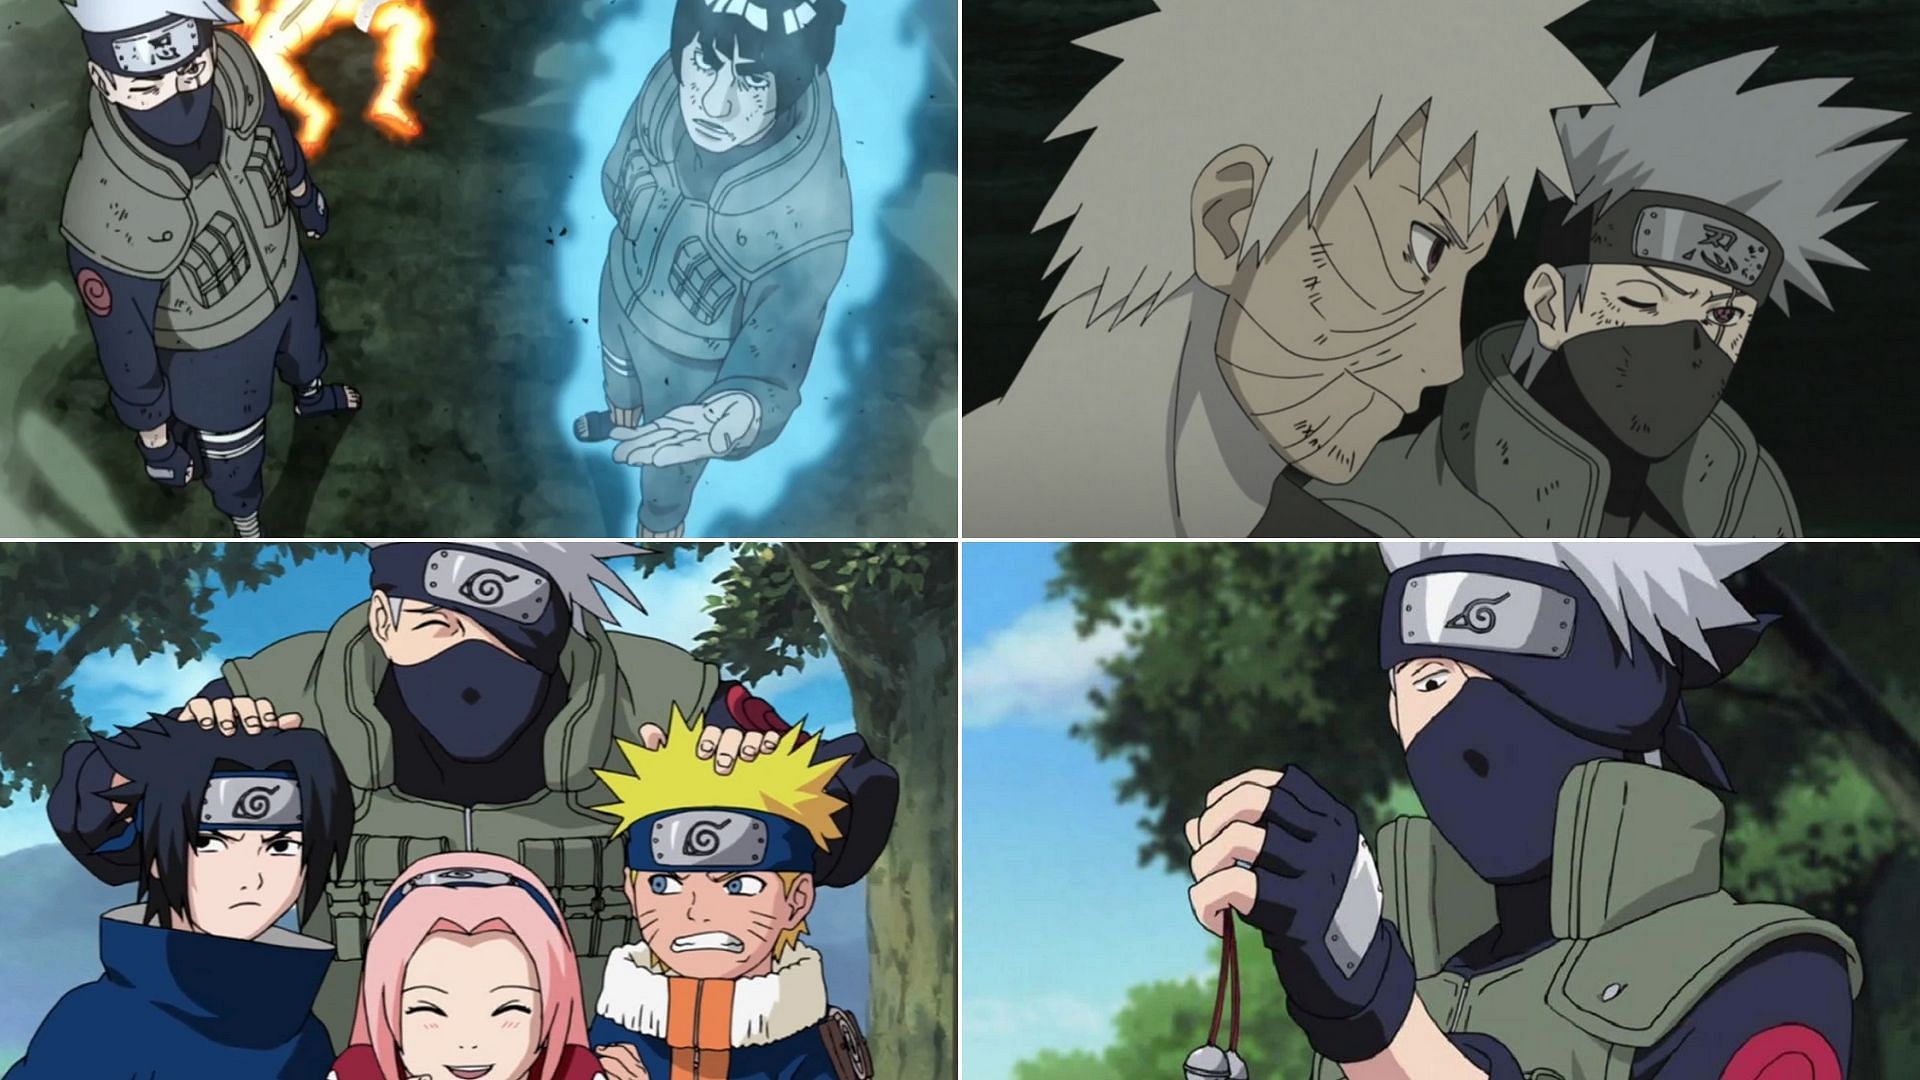 Kakashi learned the value of teamwork, and taught it to his students (Image via Studio Pierrot, Naruto)